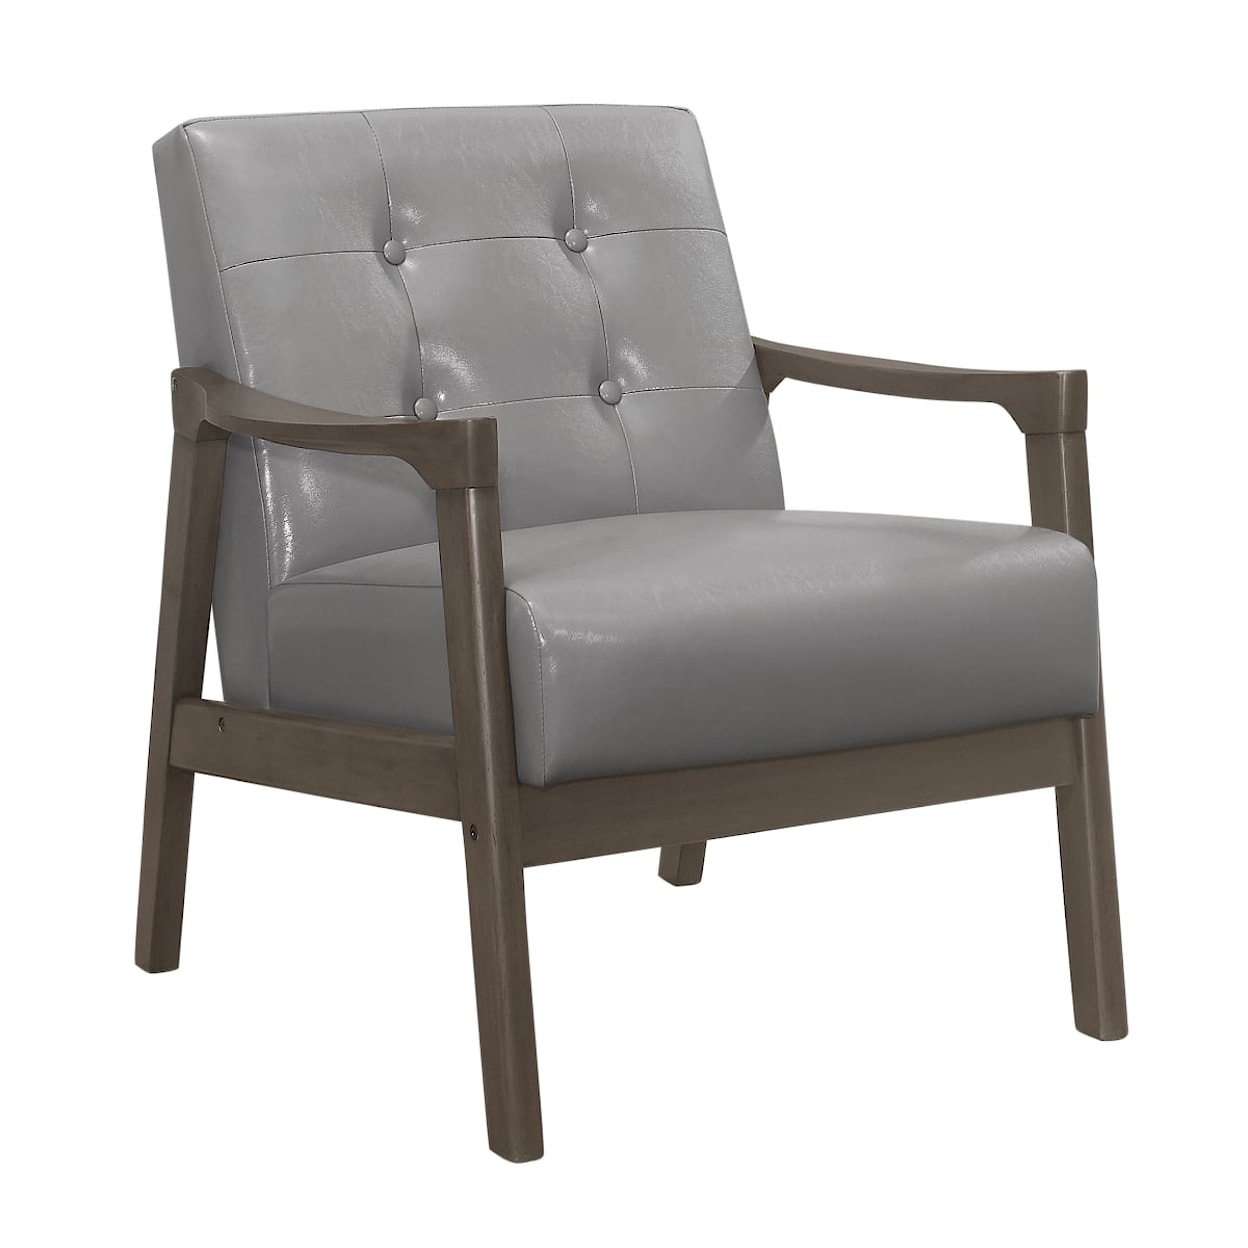 Homelegance Alby Accent Chair with Button Tufting